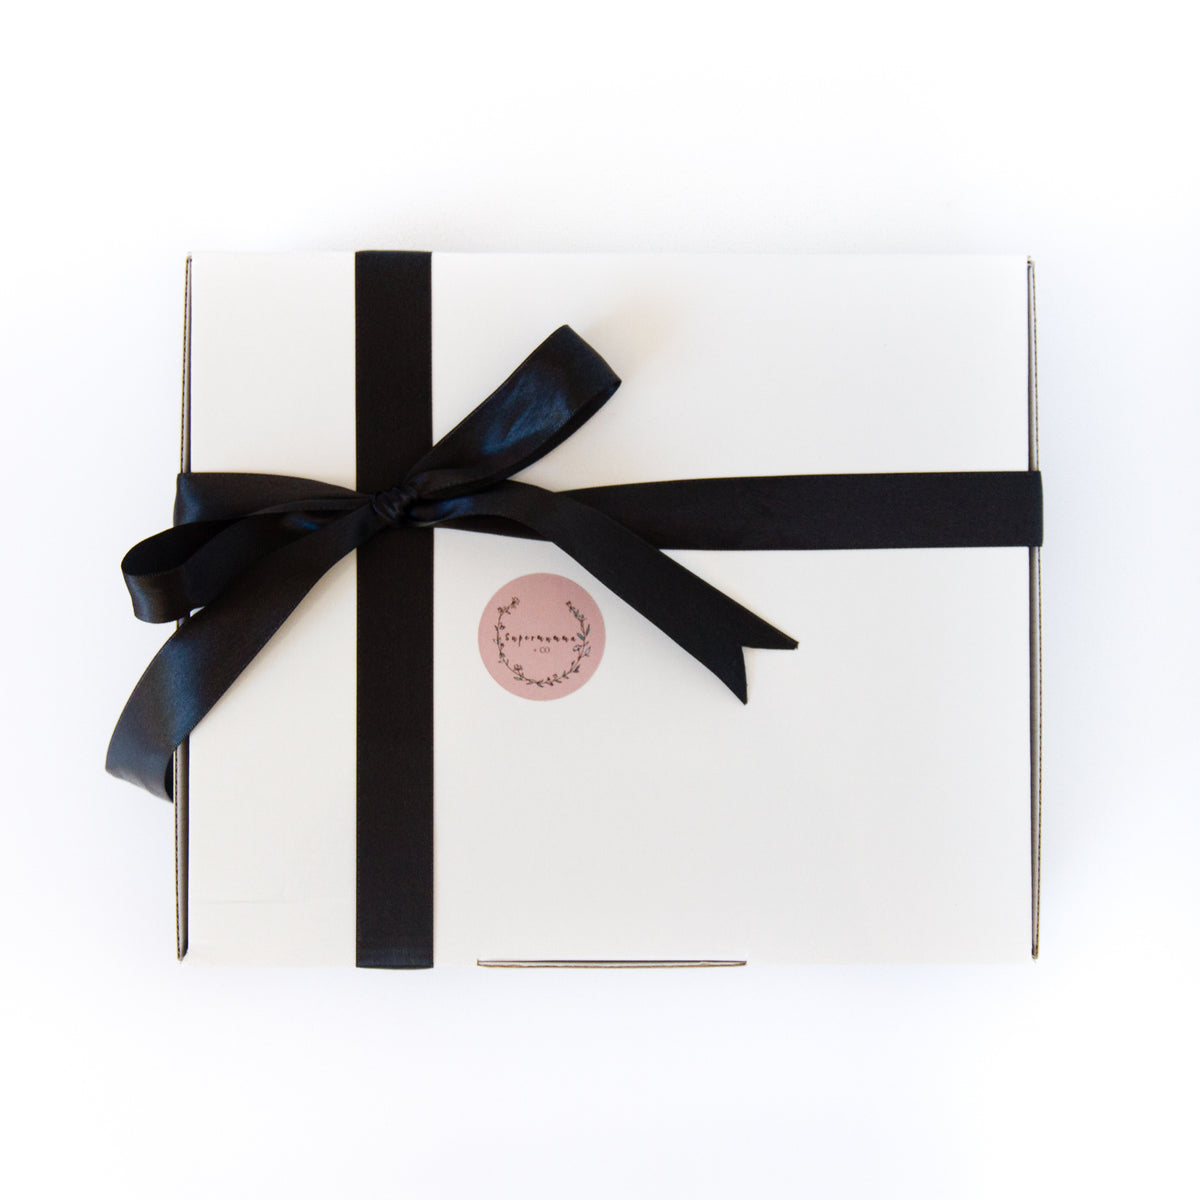 Supermumma and Co Design your own Gift Box to support MUMS with IVF, Pregnancy, Labour, Breastfeeding, Cancer, Serious Illness, NICU babies, Grief and Loss.